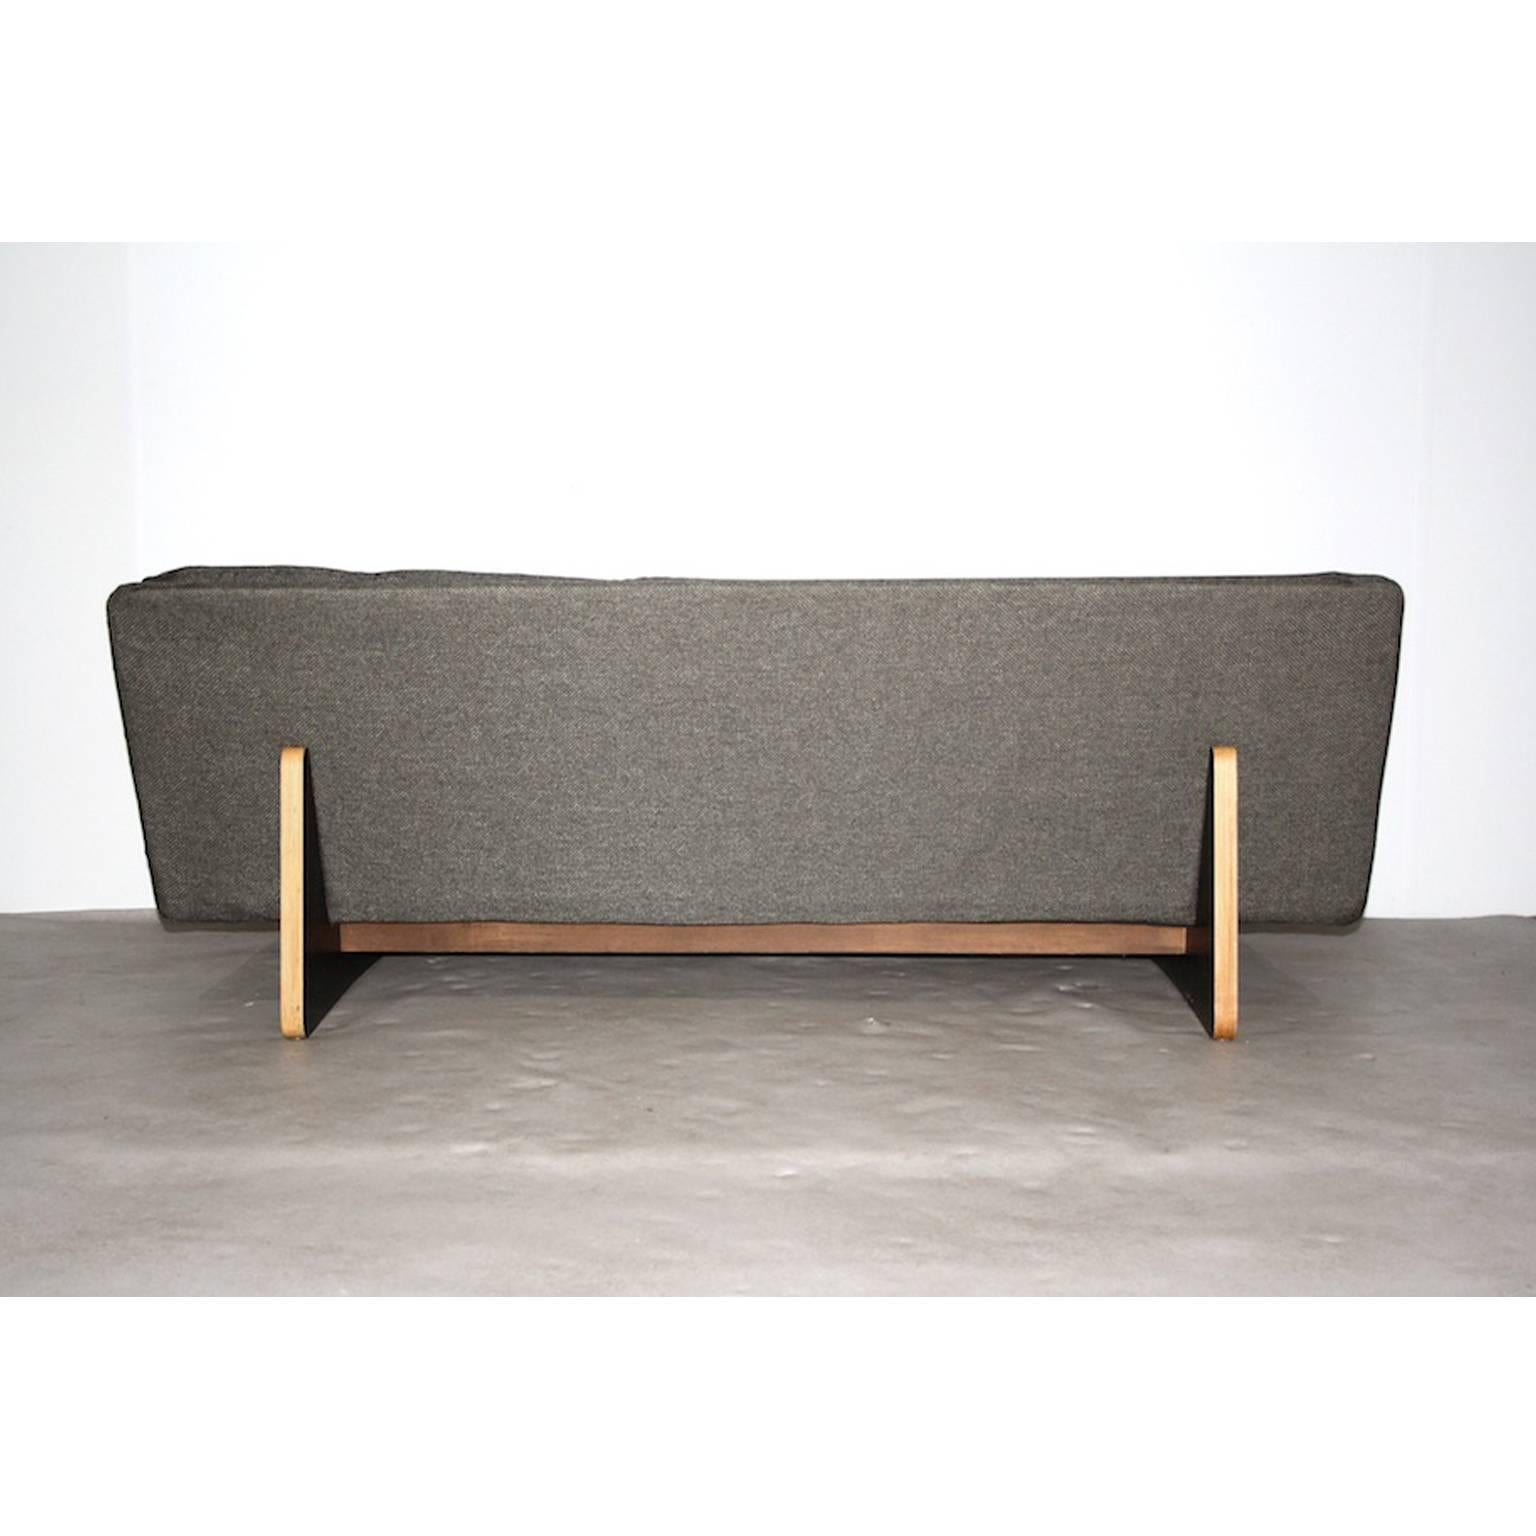 Dutch Kho Liang Ie for Artifort Three Seater Sofa Model 671, The Netherlands, 1960s For Sale